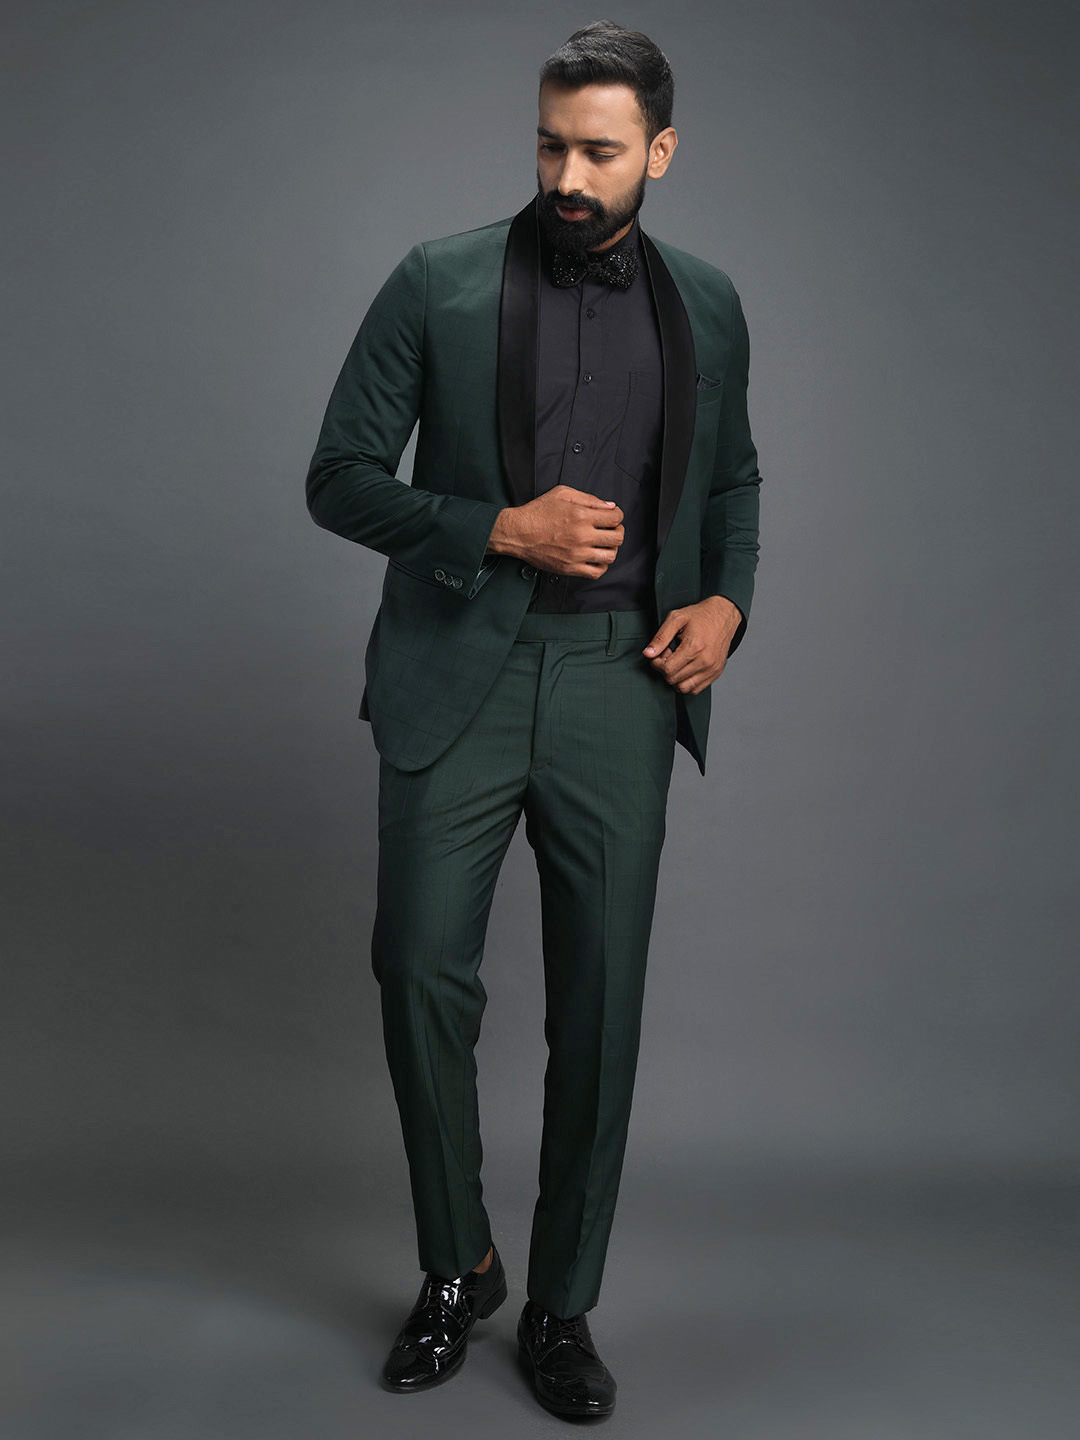 Rent/Buy Dark Green Tuxedo Home Trial Free Delivery